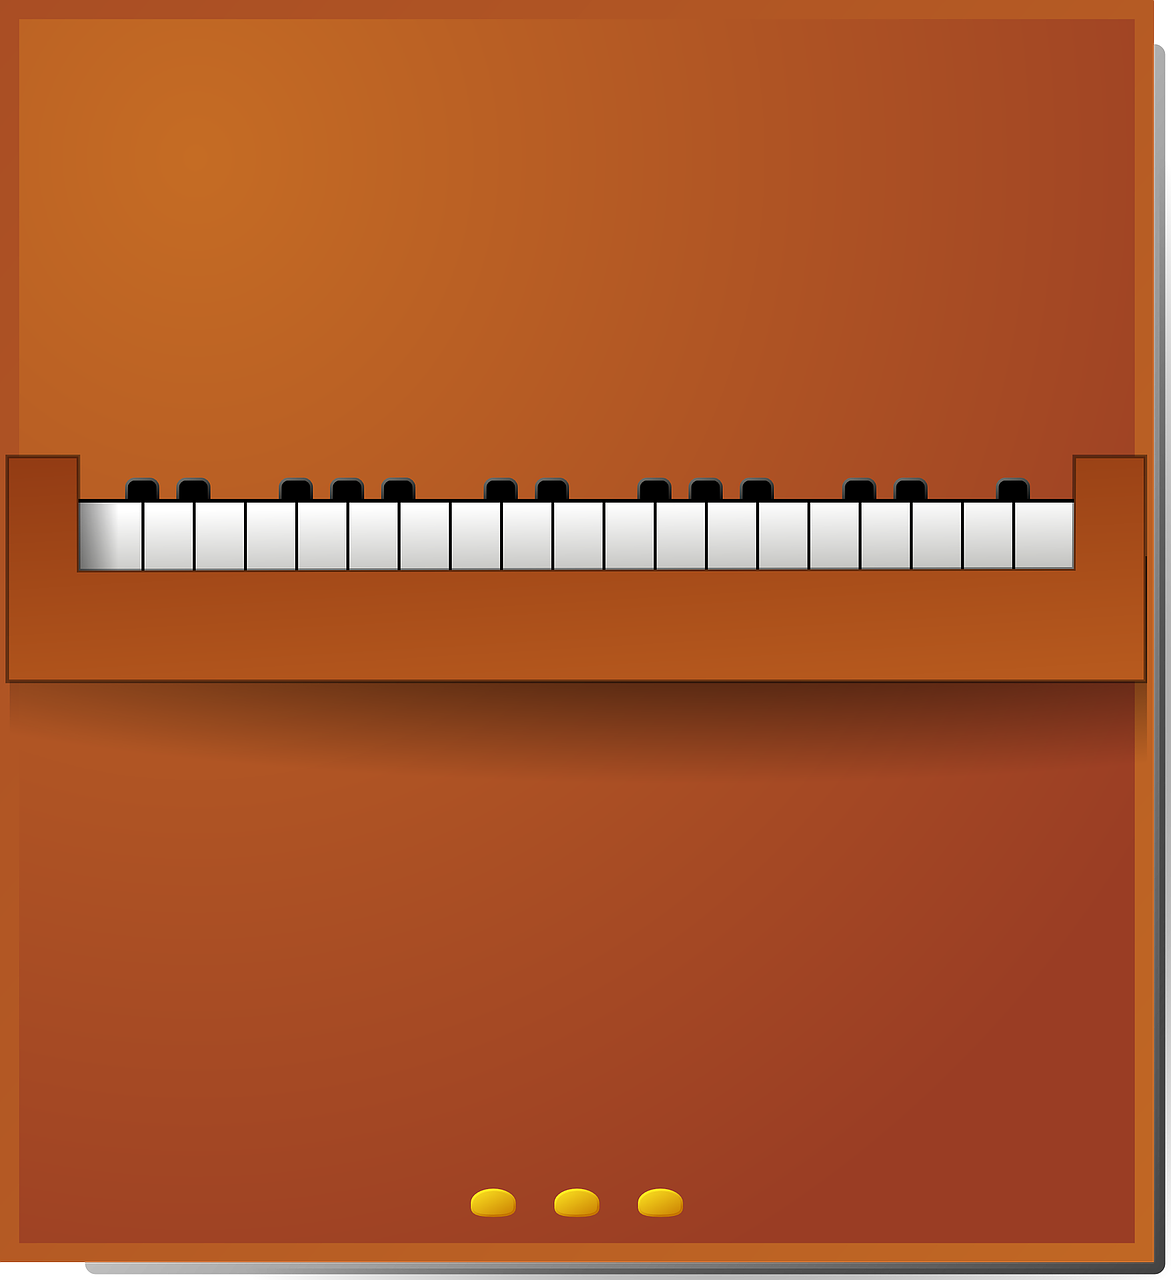 piano,keys,music,pedals,brown,upright,vertical,elements,grand,free vector graphics,free pictures, free photos, free images, royalty free, free illustrations, public domain